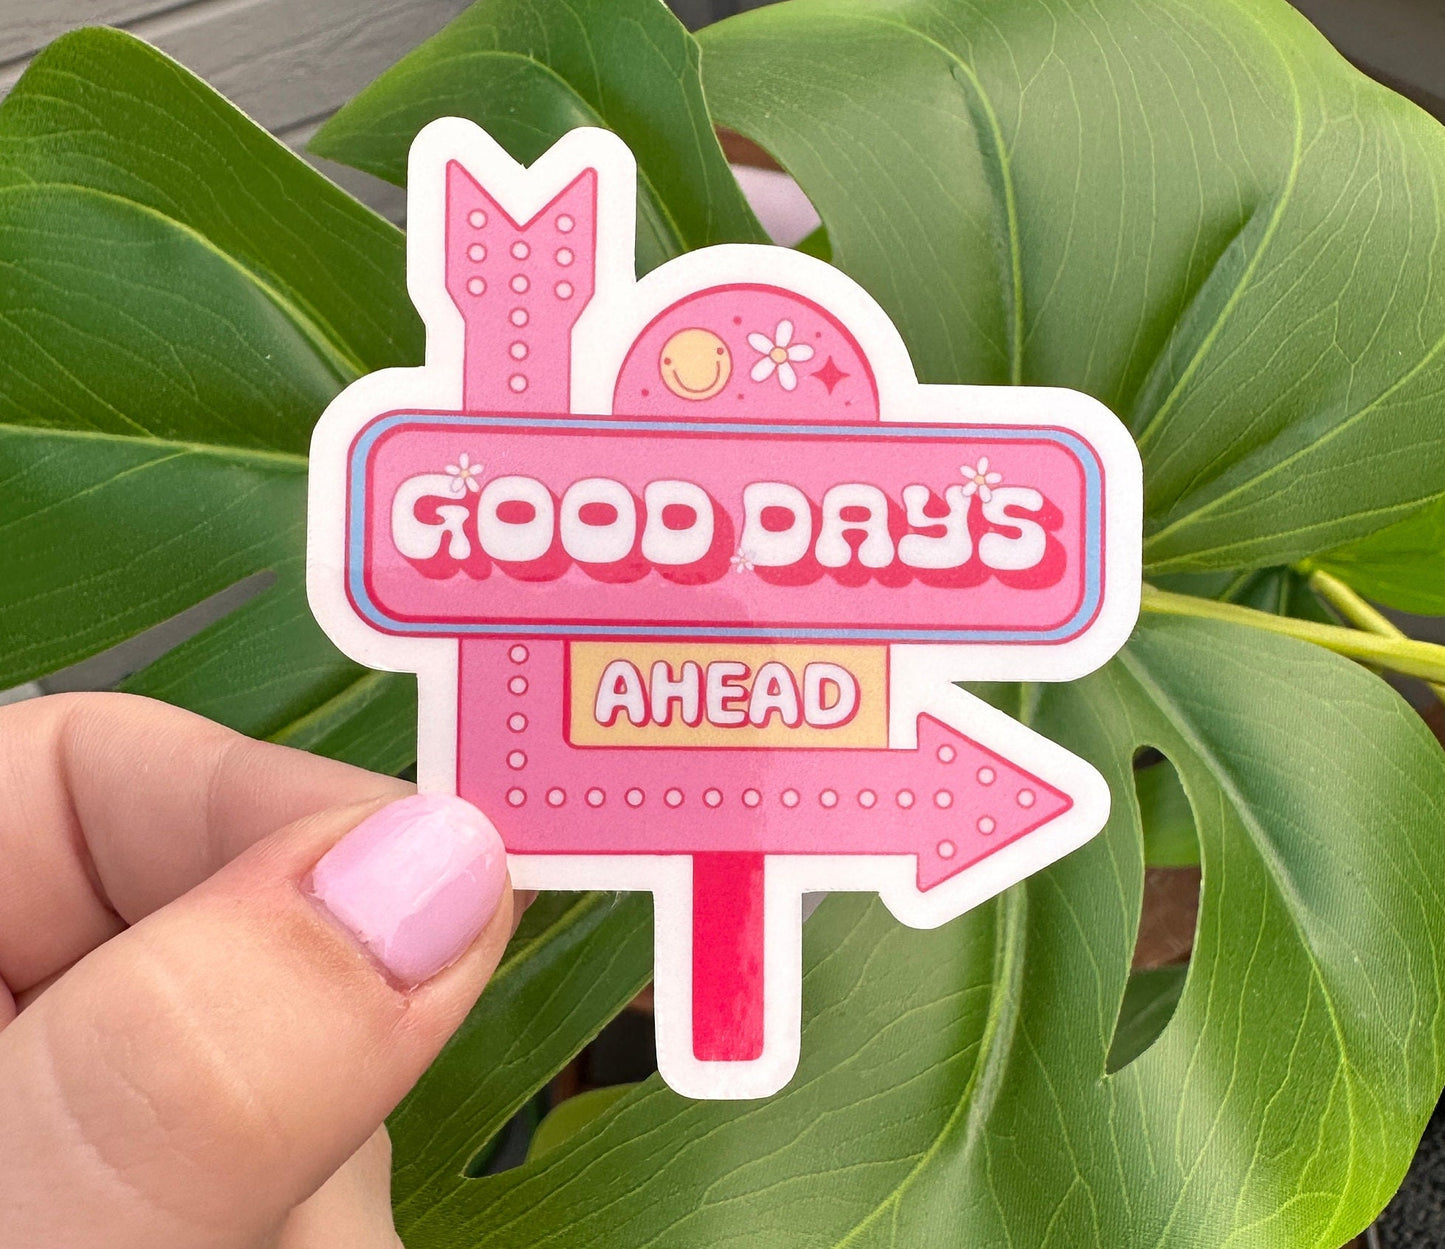 Good Days Ahead Sticker, Pink Neon Light, Mental Health, Inspirational Quote, Positive Outlook, Vegas Vibes, Vintage Retro Groovy, Happy Fun